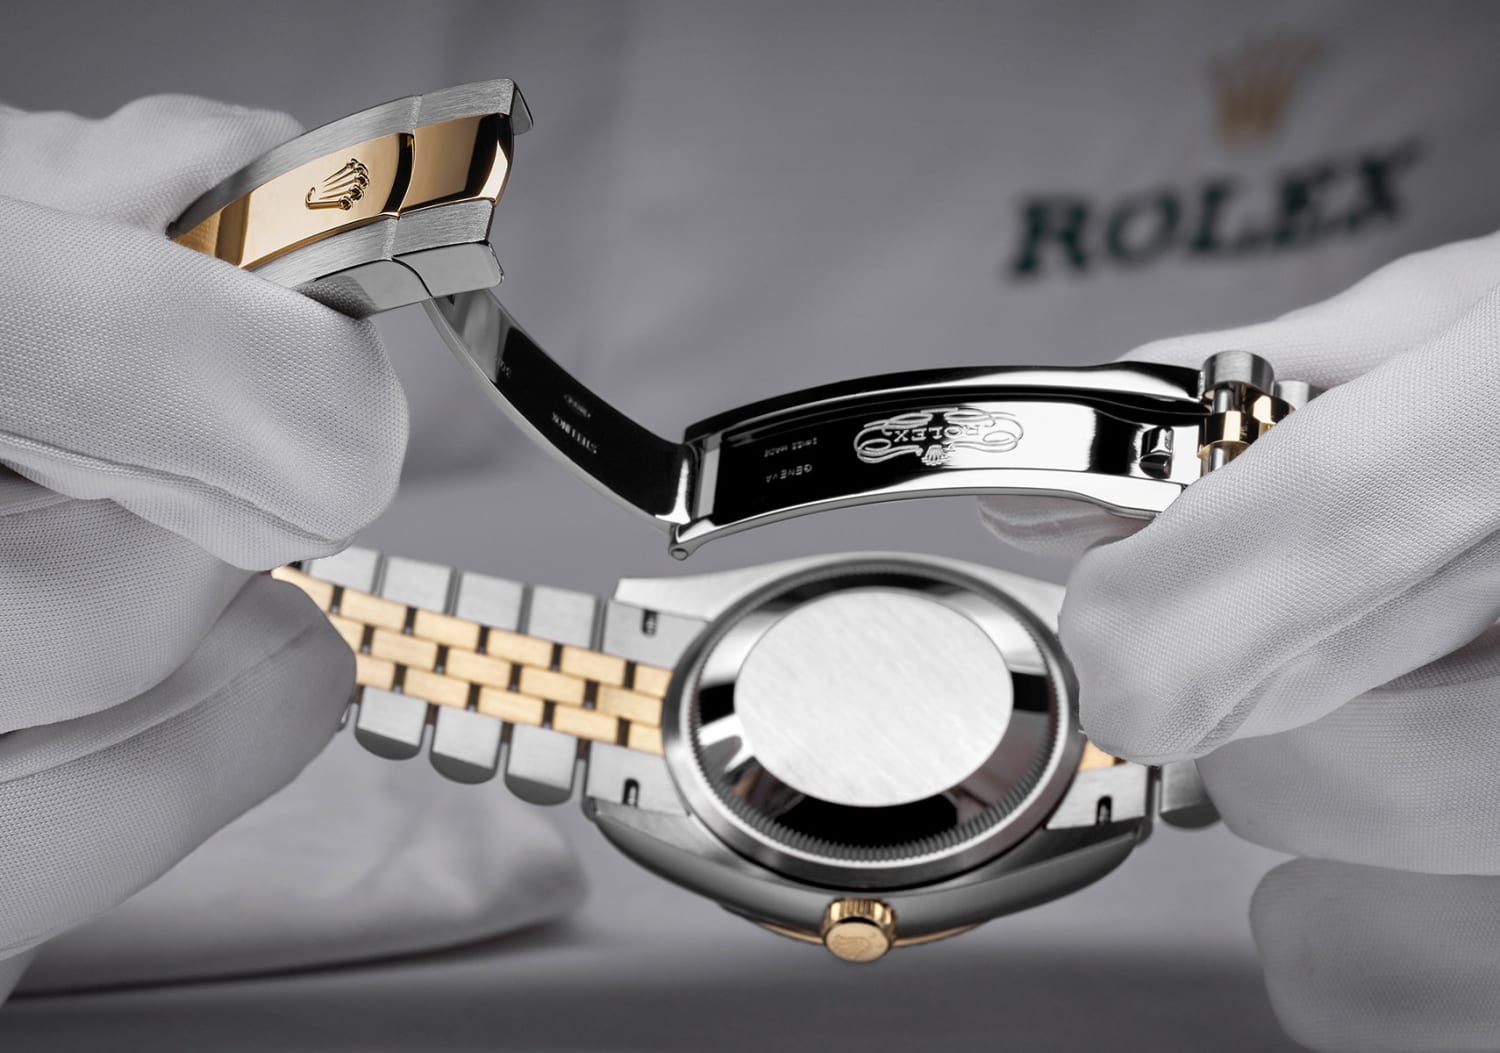 The Rolex Certification